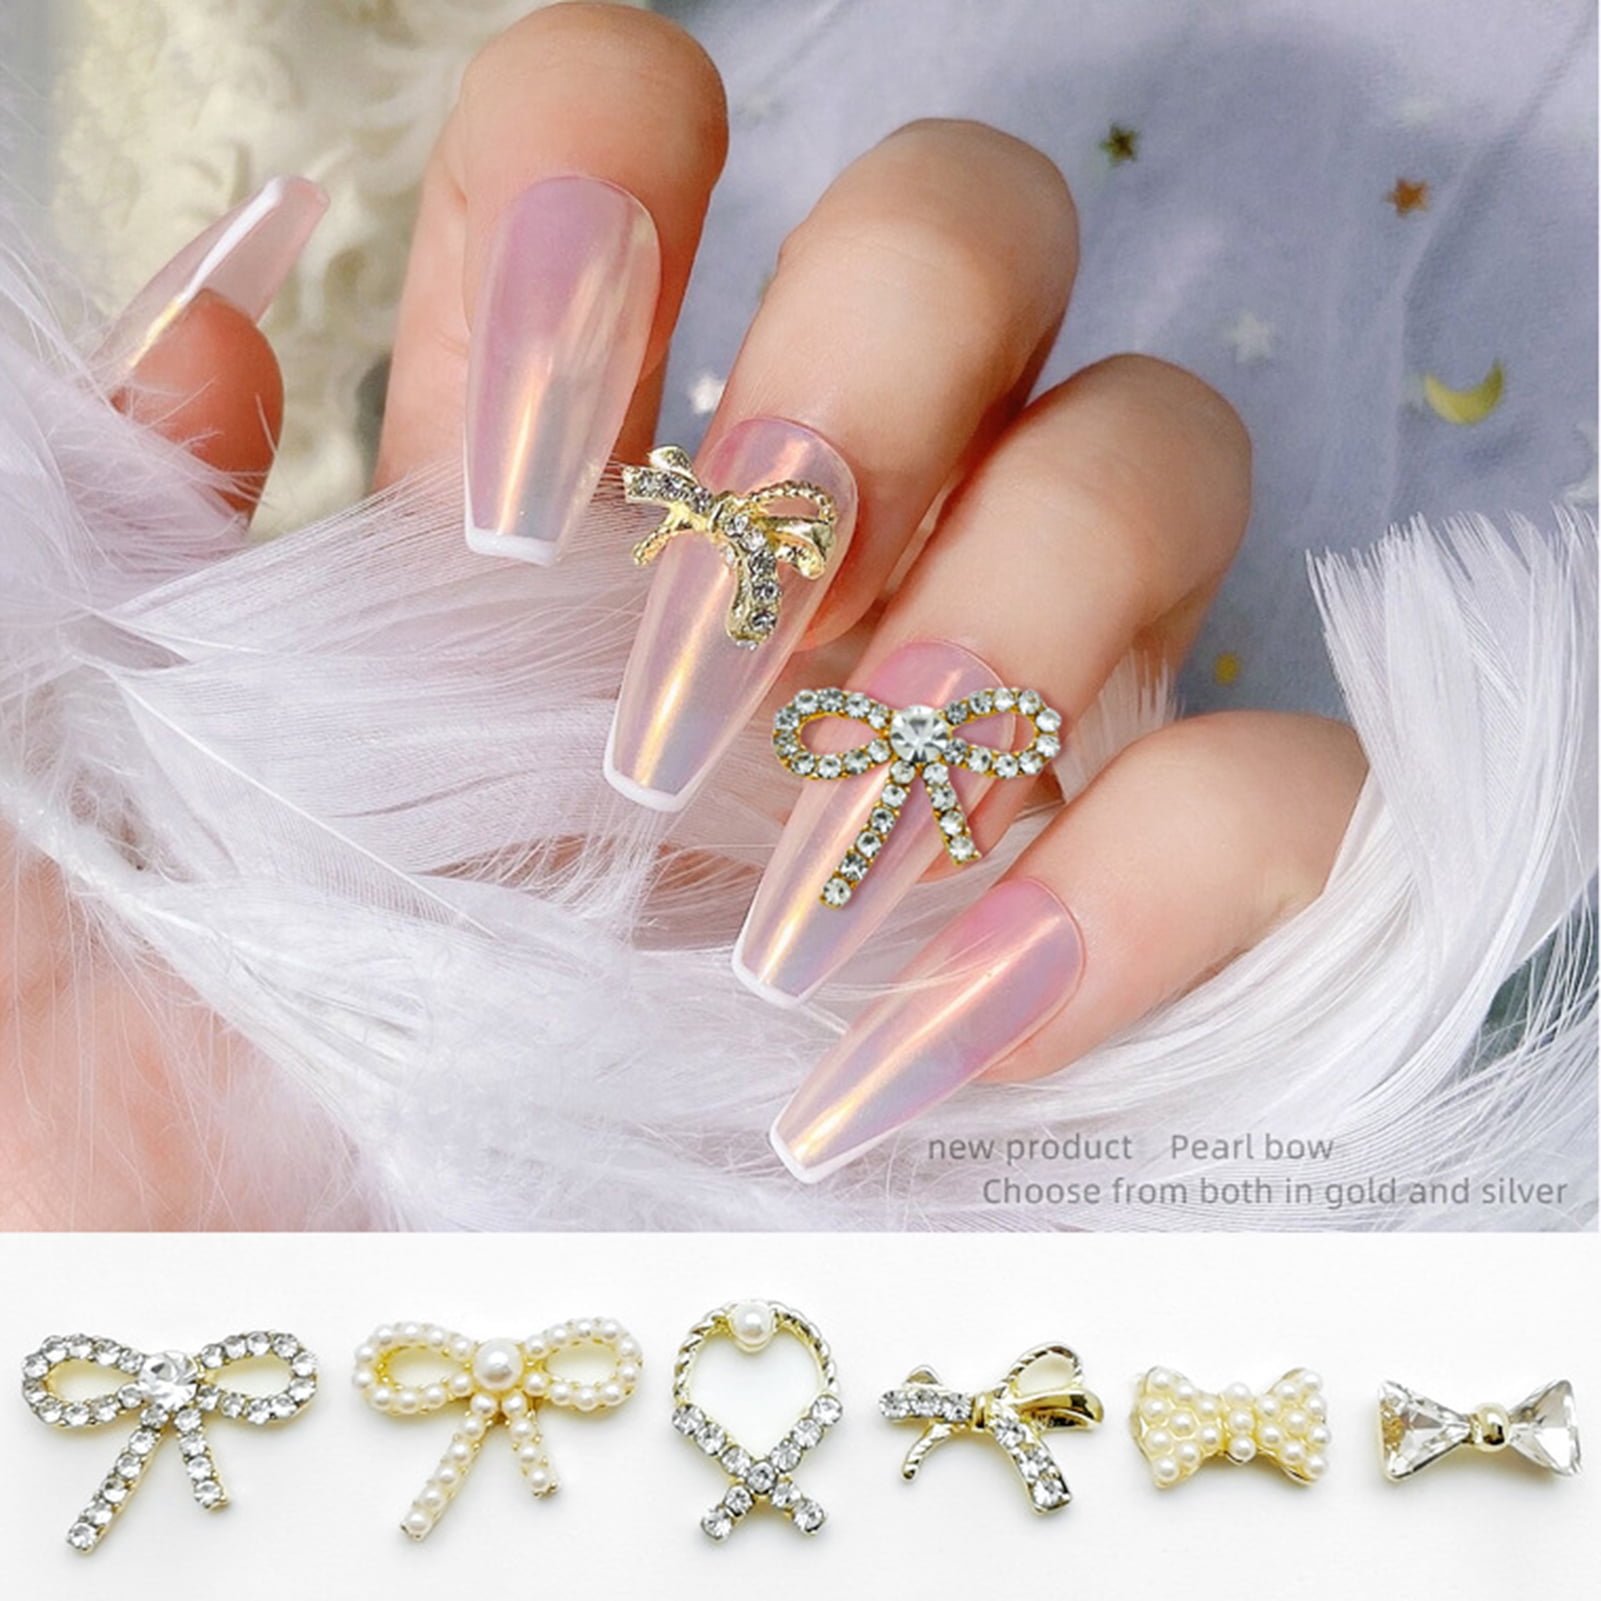 20Pcs/Pack Nail Charms Luxury Nail Art Decoration Random Styles Bow Tie  Faux Pearl Nail Rhinestone Jewelry Ornaments for Women